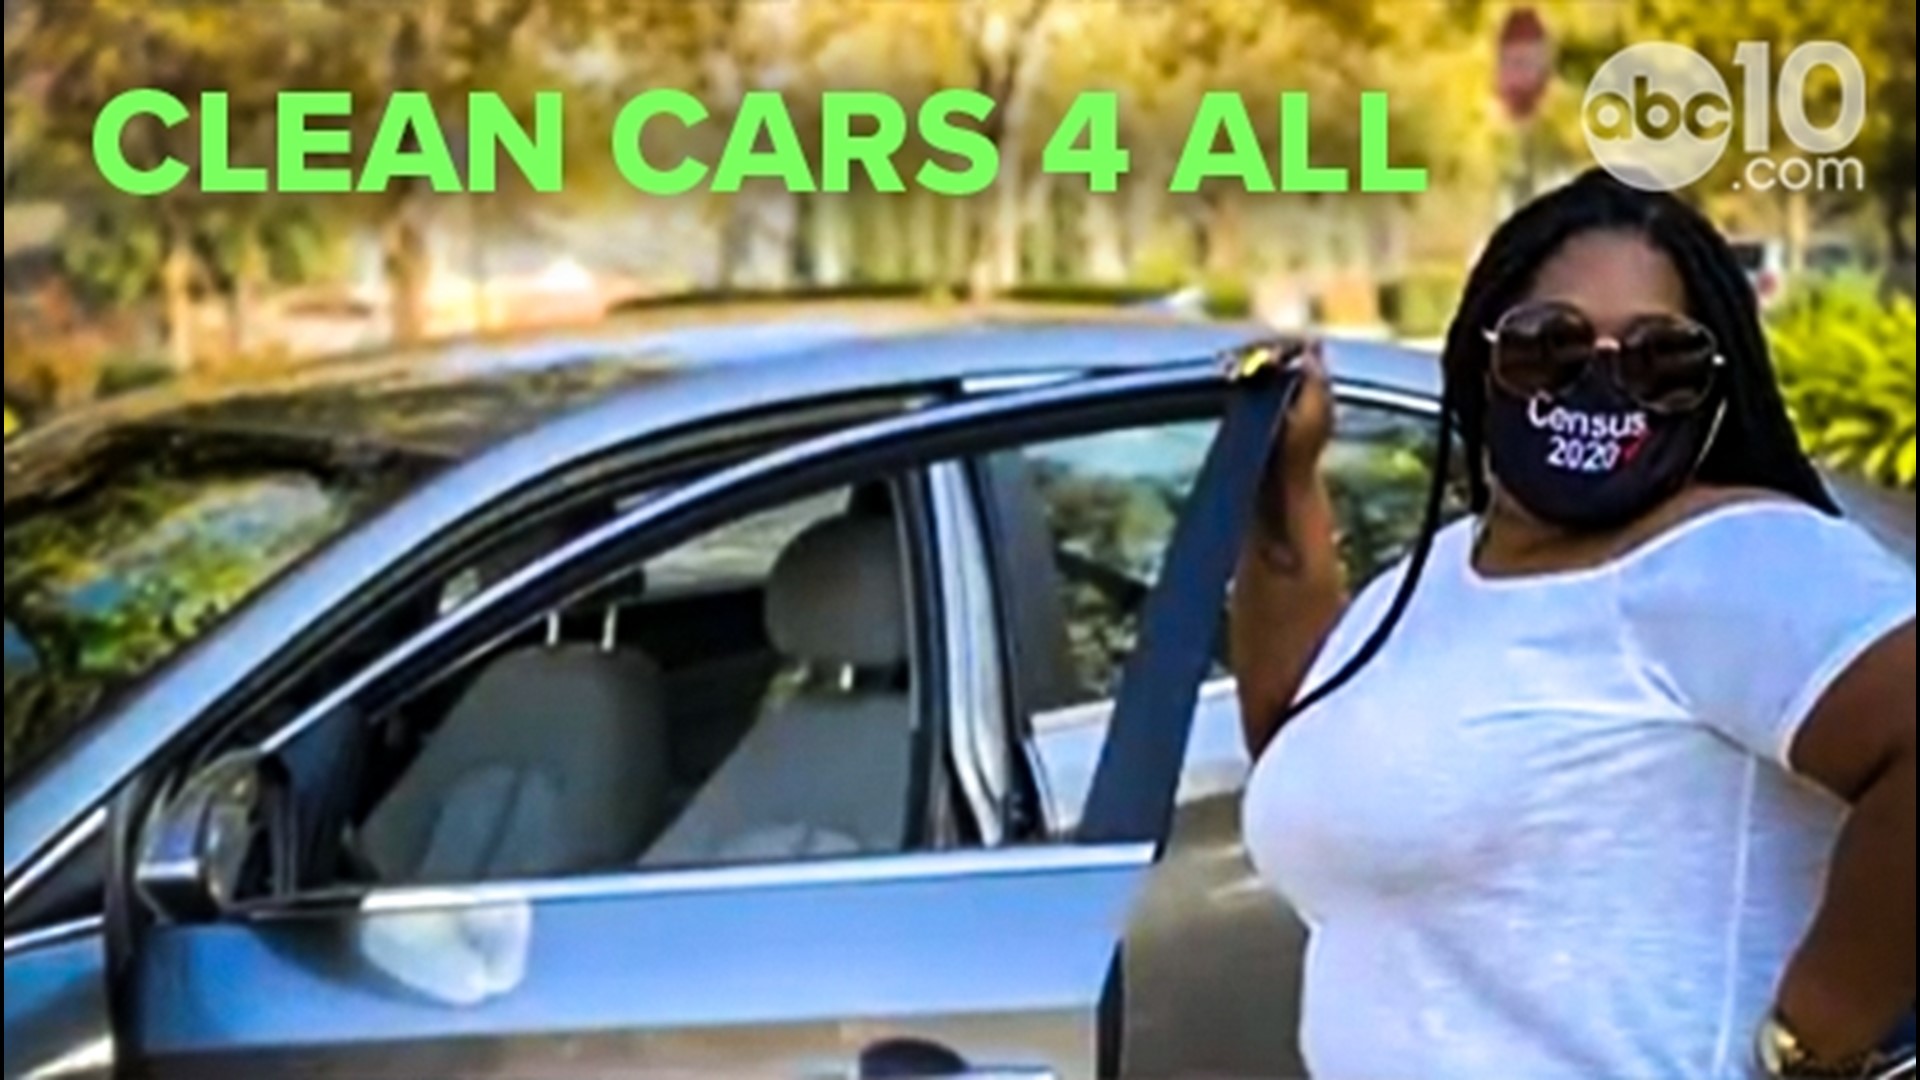 To find out if you're eligible for Sacramento's Clean Cars 4 All program that allows you to trade in your current car, visit SacCleanCars4All.org.